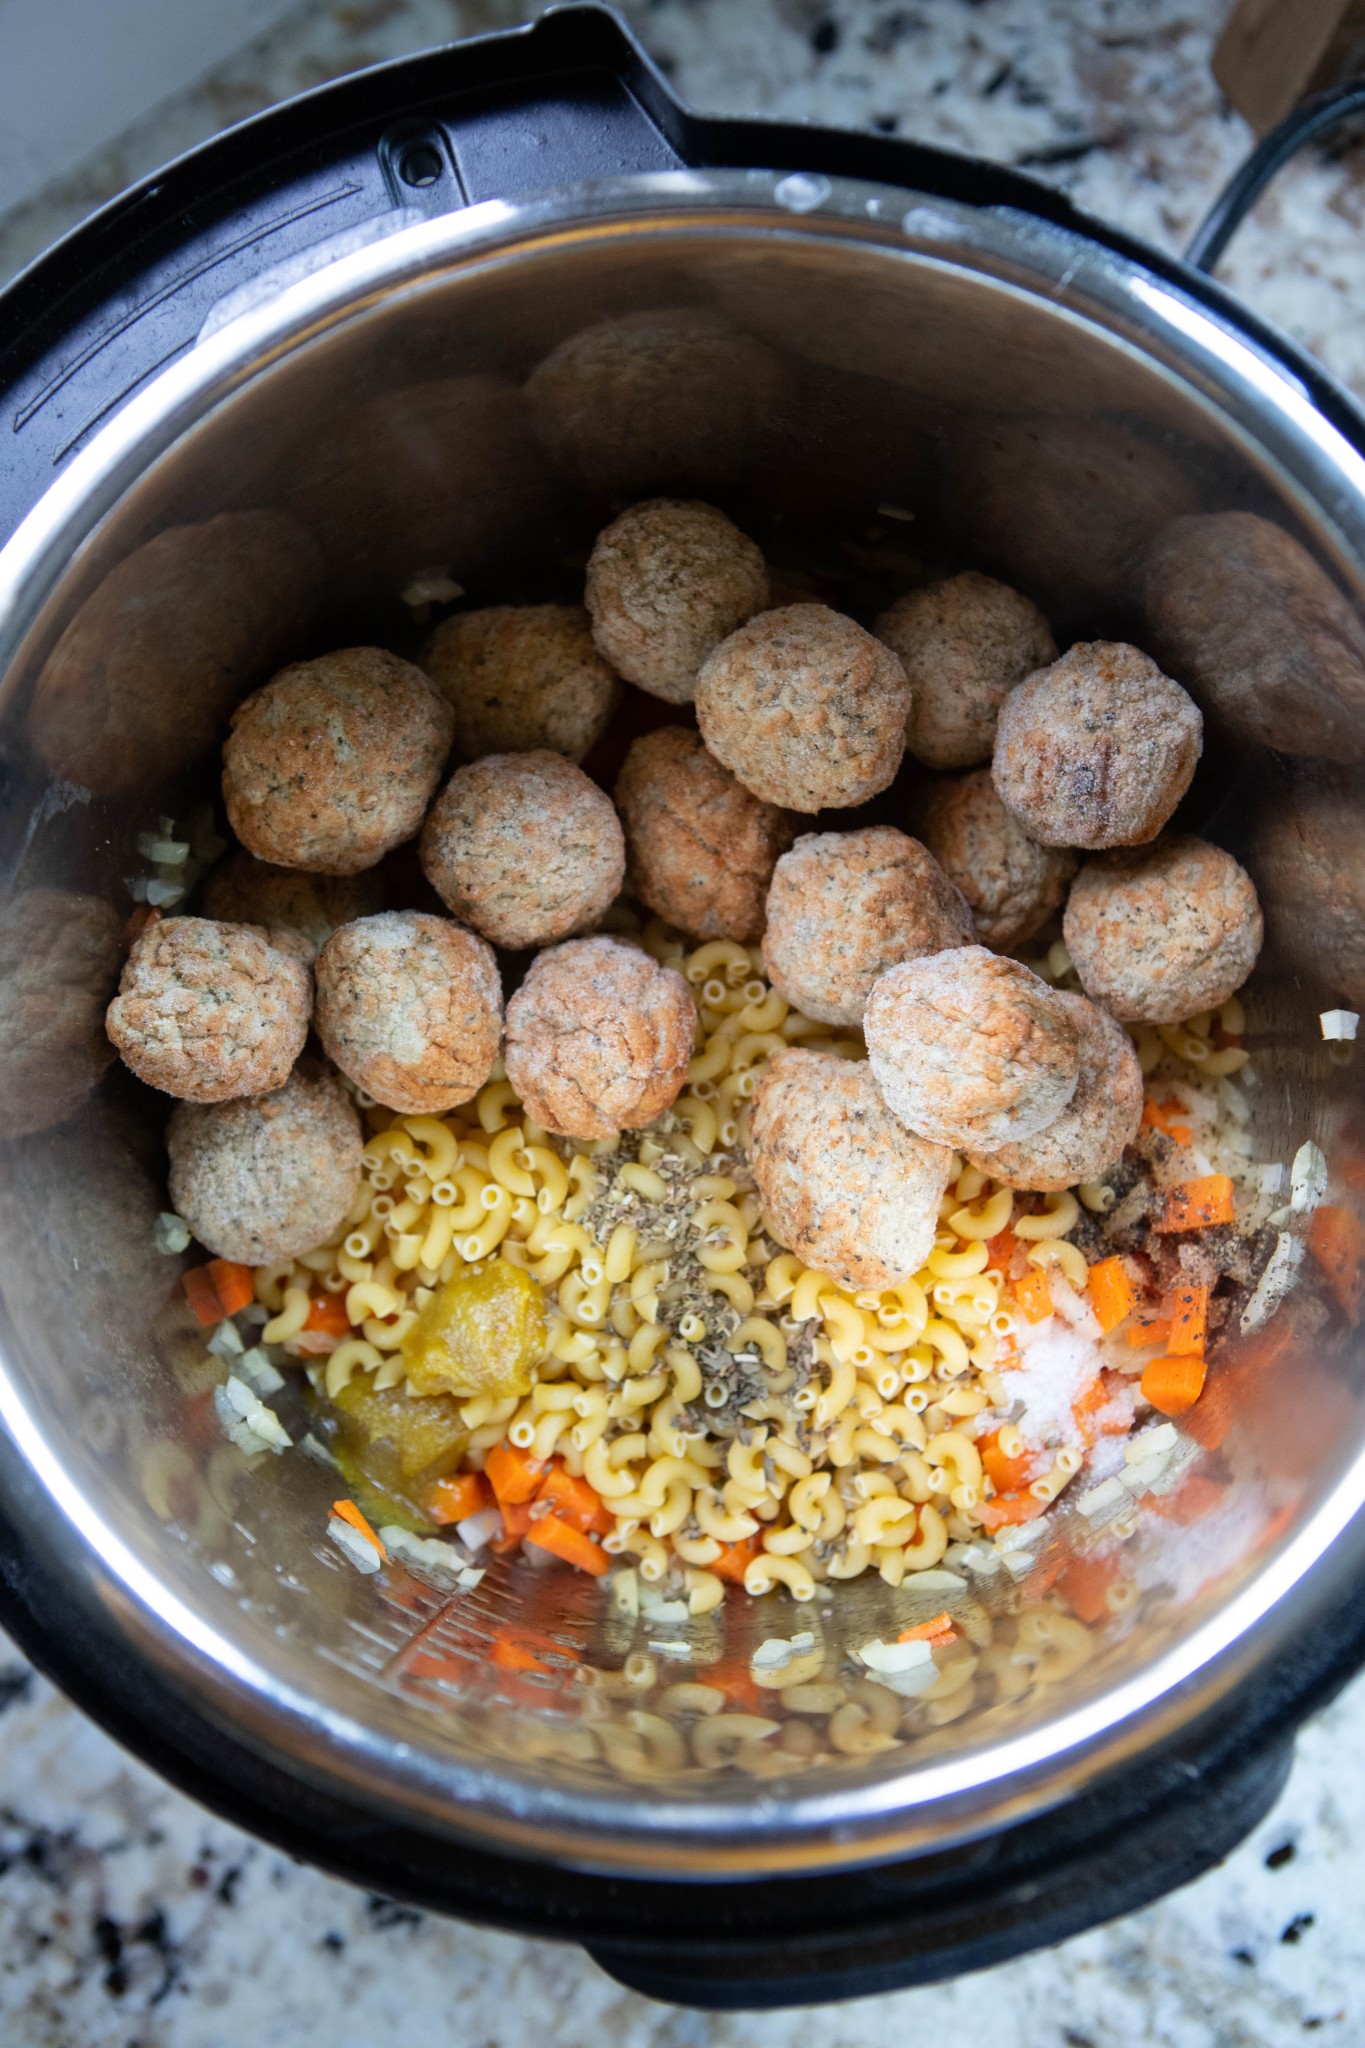 meatballs, pasta, carrots and spices in Instant Pot insert